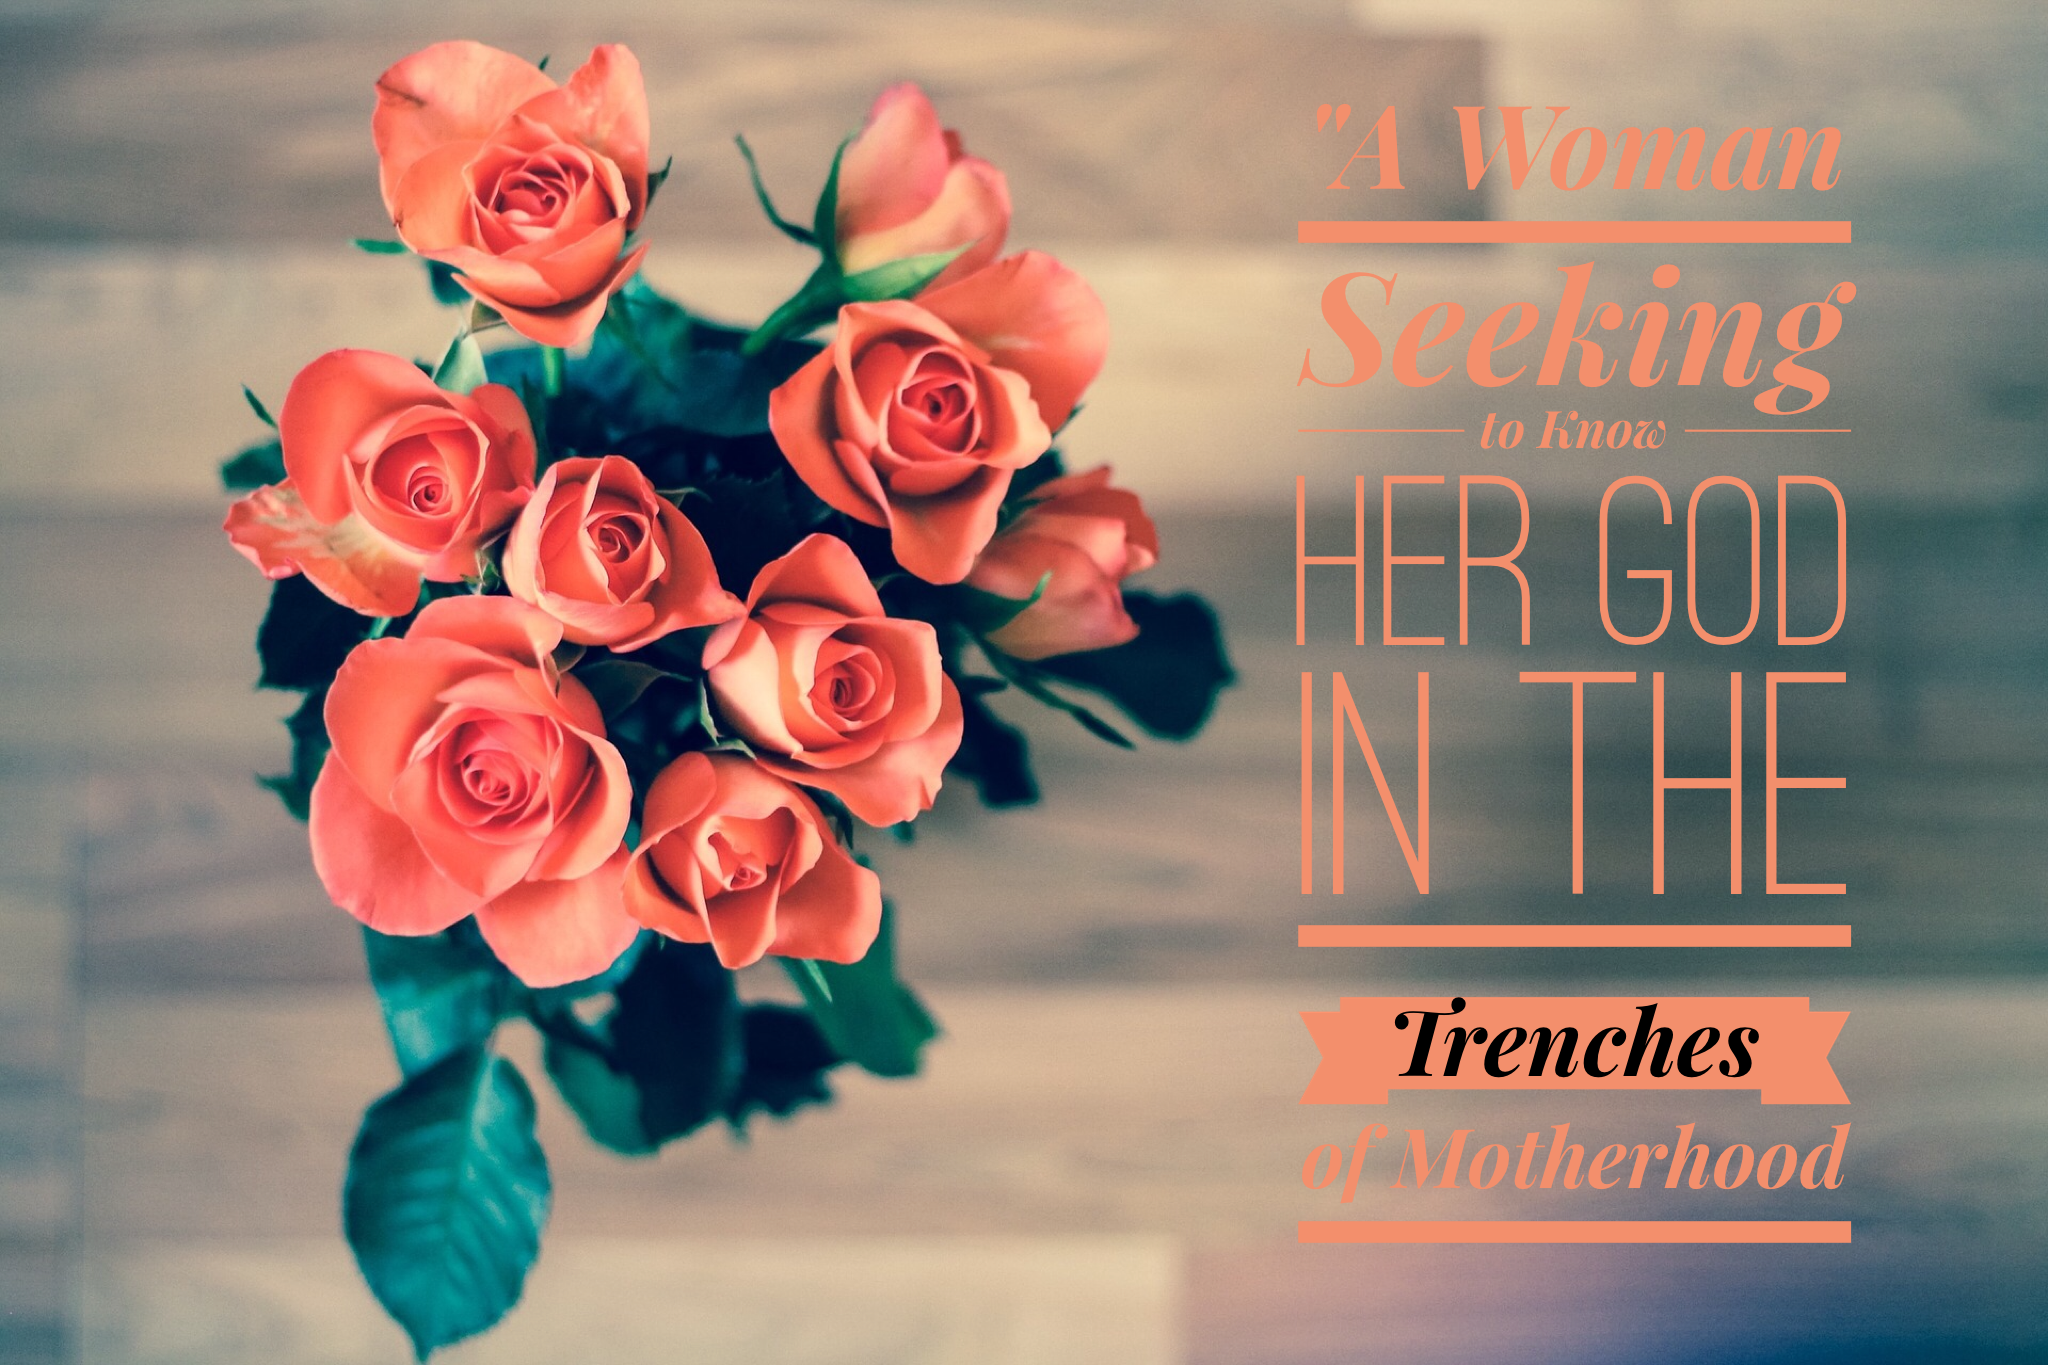 A Woman Seeking to Know Her God in the Trenches of Motherhood | www.codyandras.com/blog/2017/7/24/a-woman-trying-to-know-her-god-in-the-trenches-of-motherhood